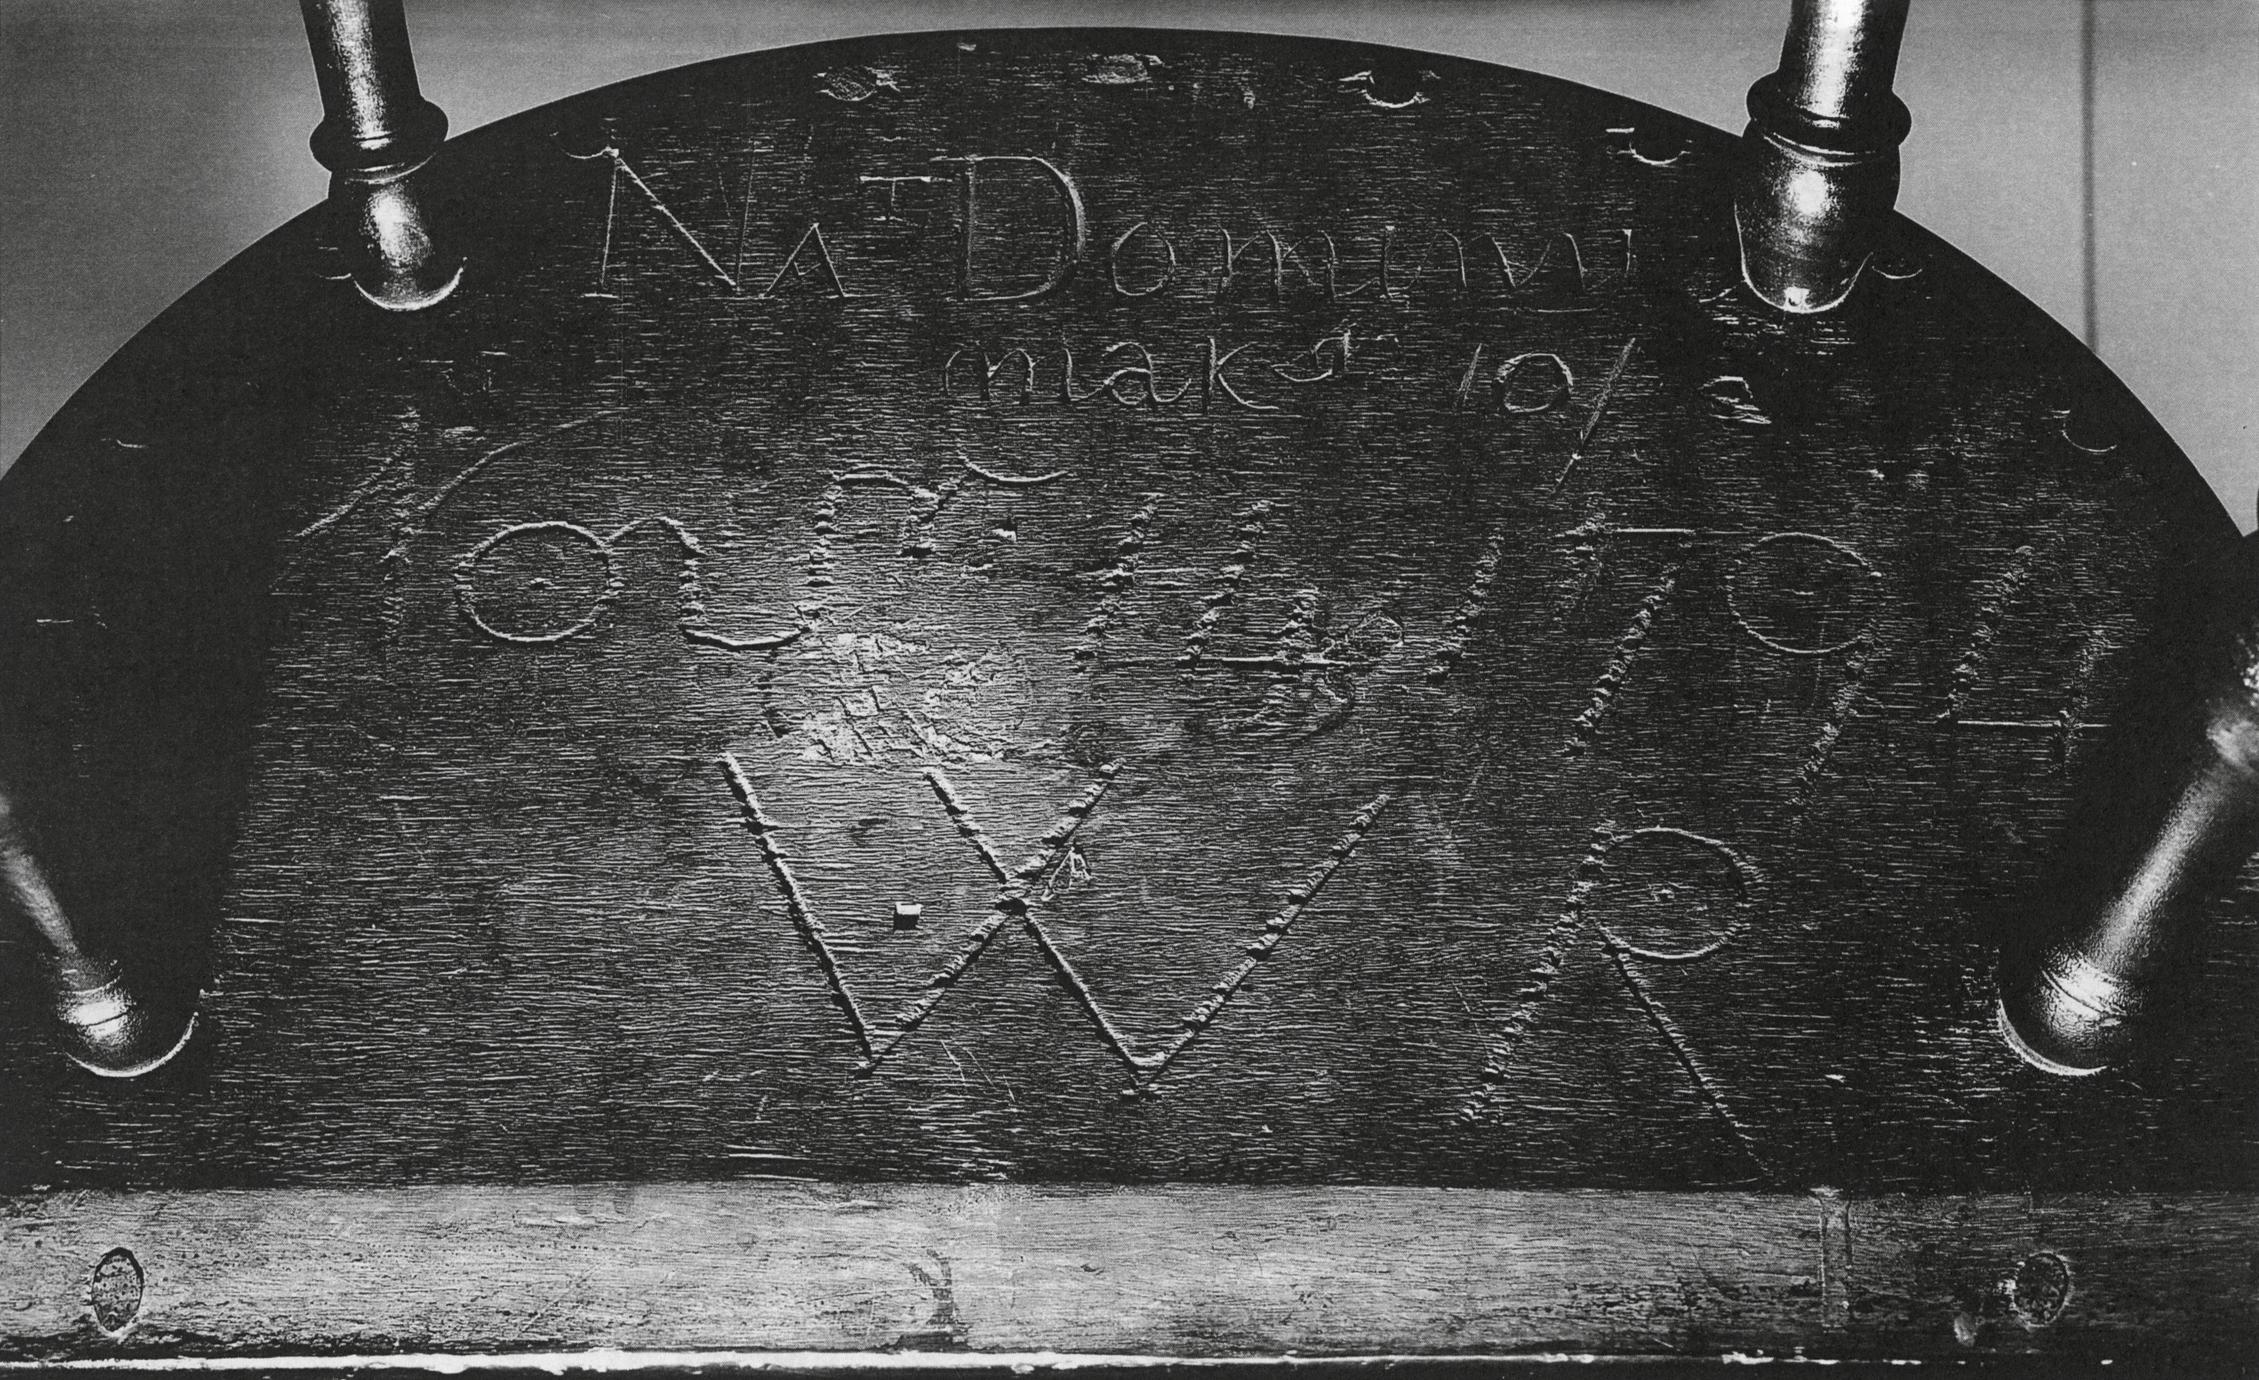 Black and white photograph of Dominy's stamp on the underside of the Windsor armchair.